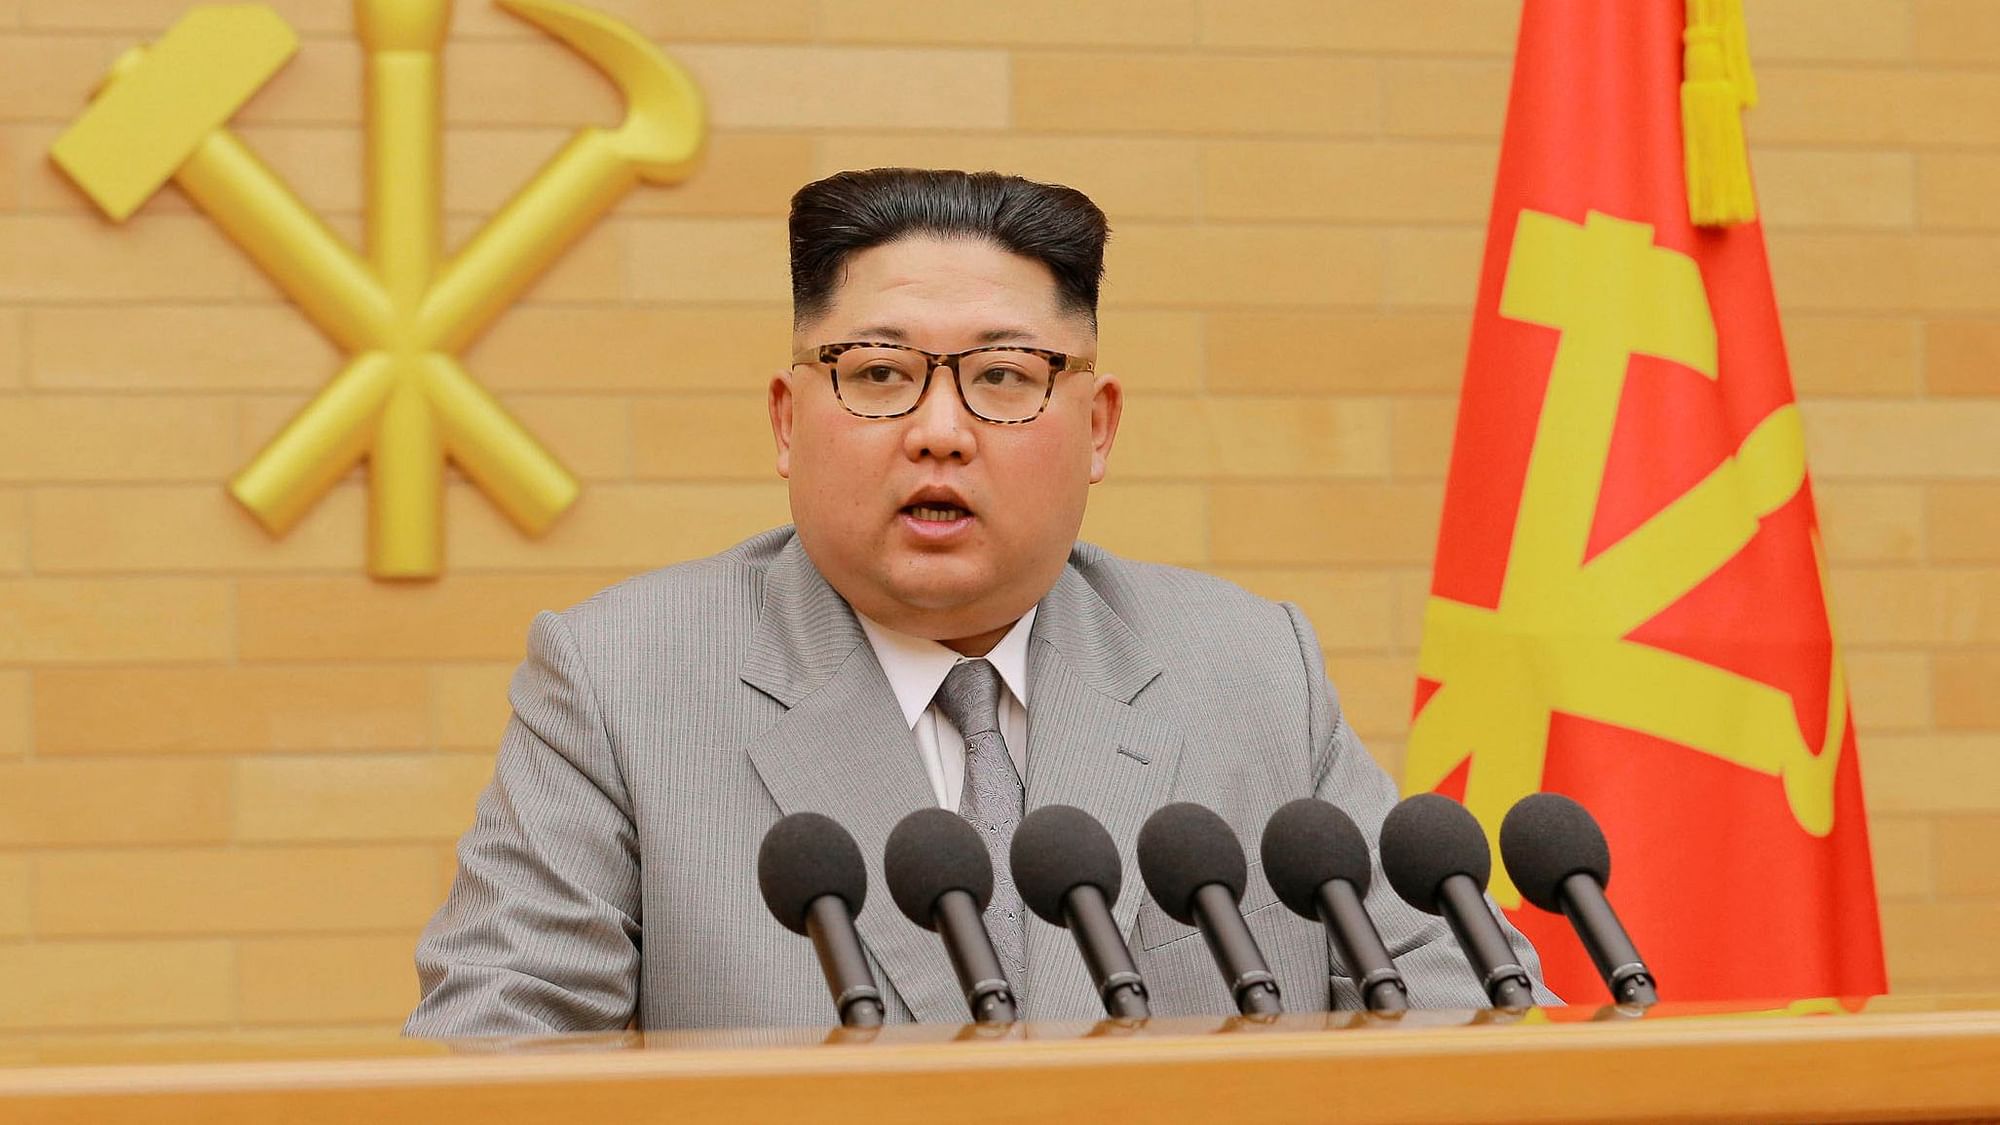 File image of North Korean leader Kim Jong-un delivering his 2018 New Year’s speech at an undisclosed place in North Korea.